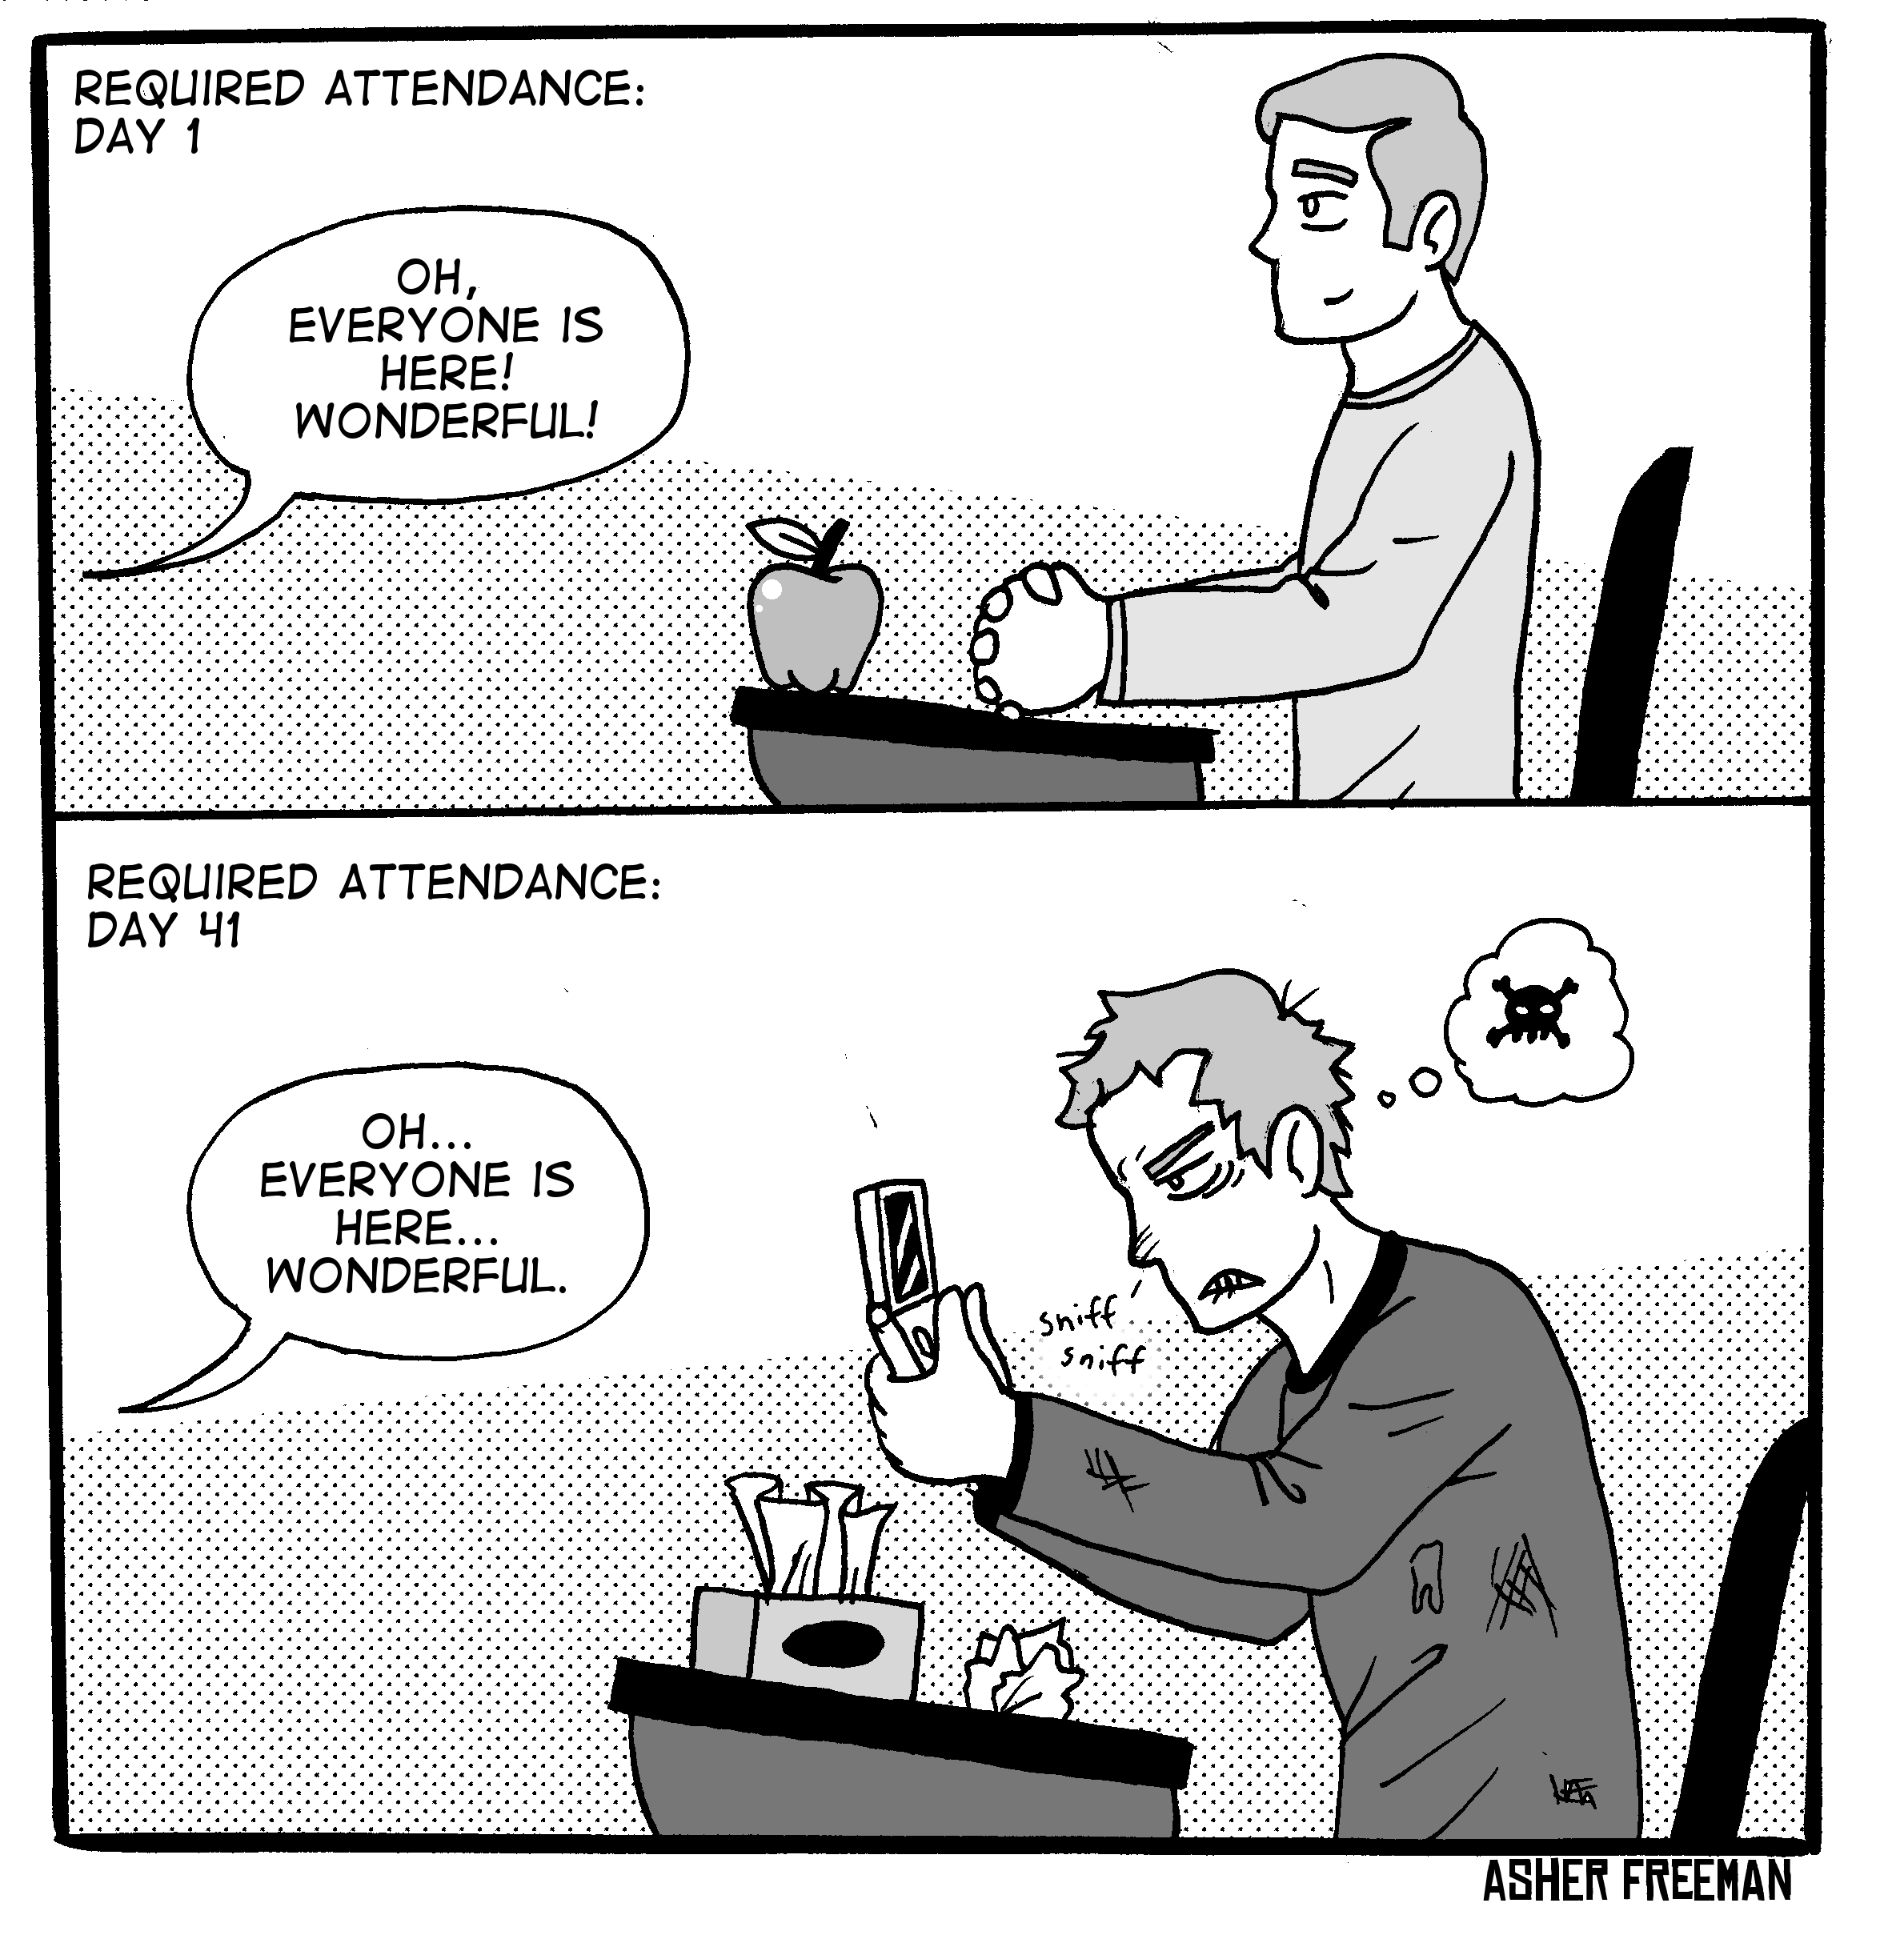 Enough with college attendance policies